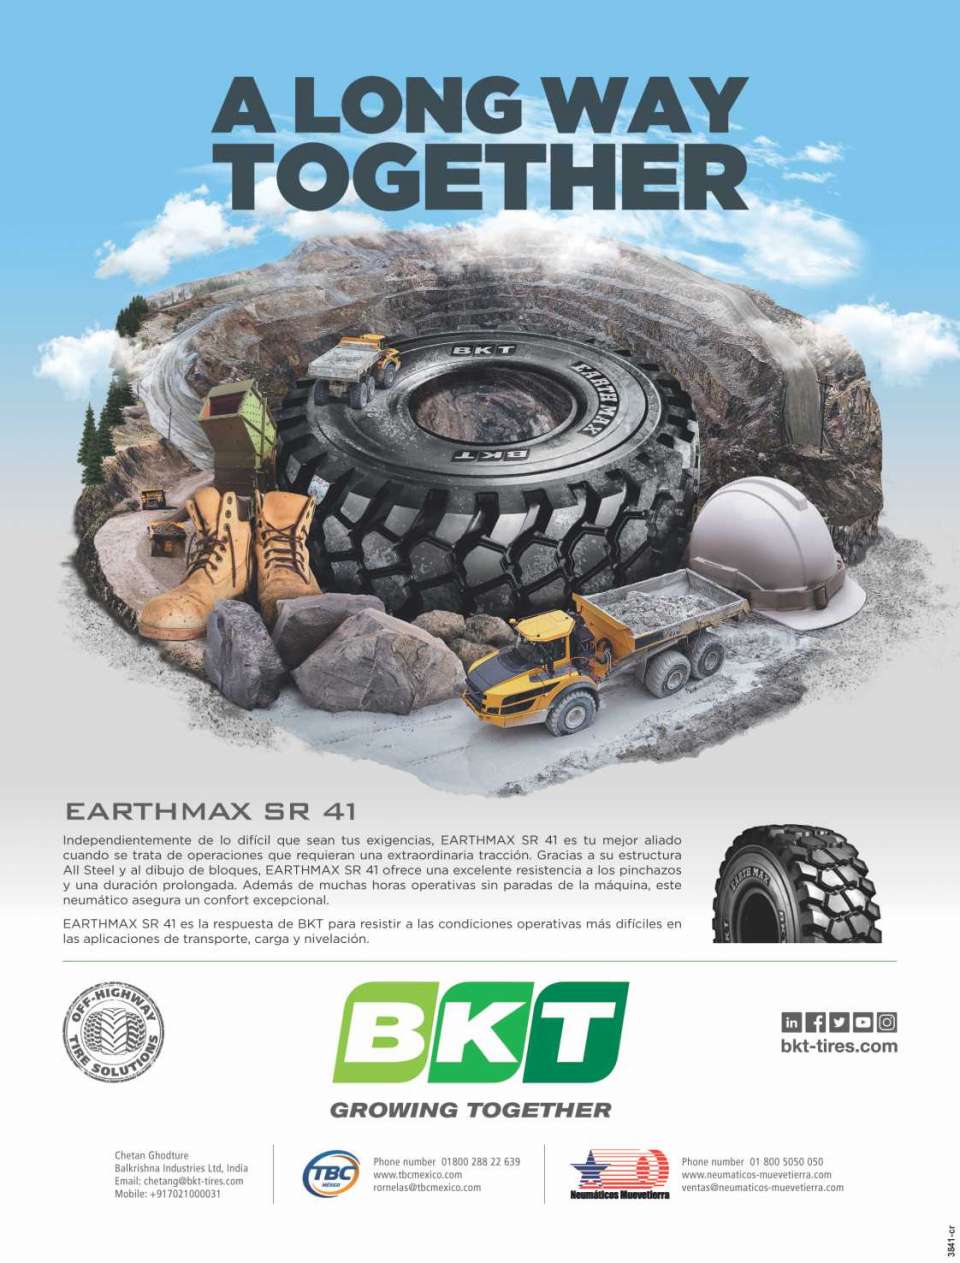 BKT includes specific tire ranges for construction and OTR. EARTHMAX SR 41 is an All Steel radial tire, with extraordinary traction and stability.